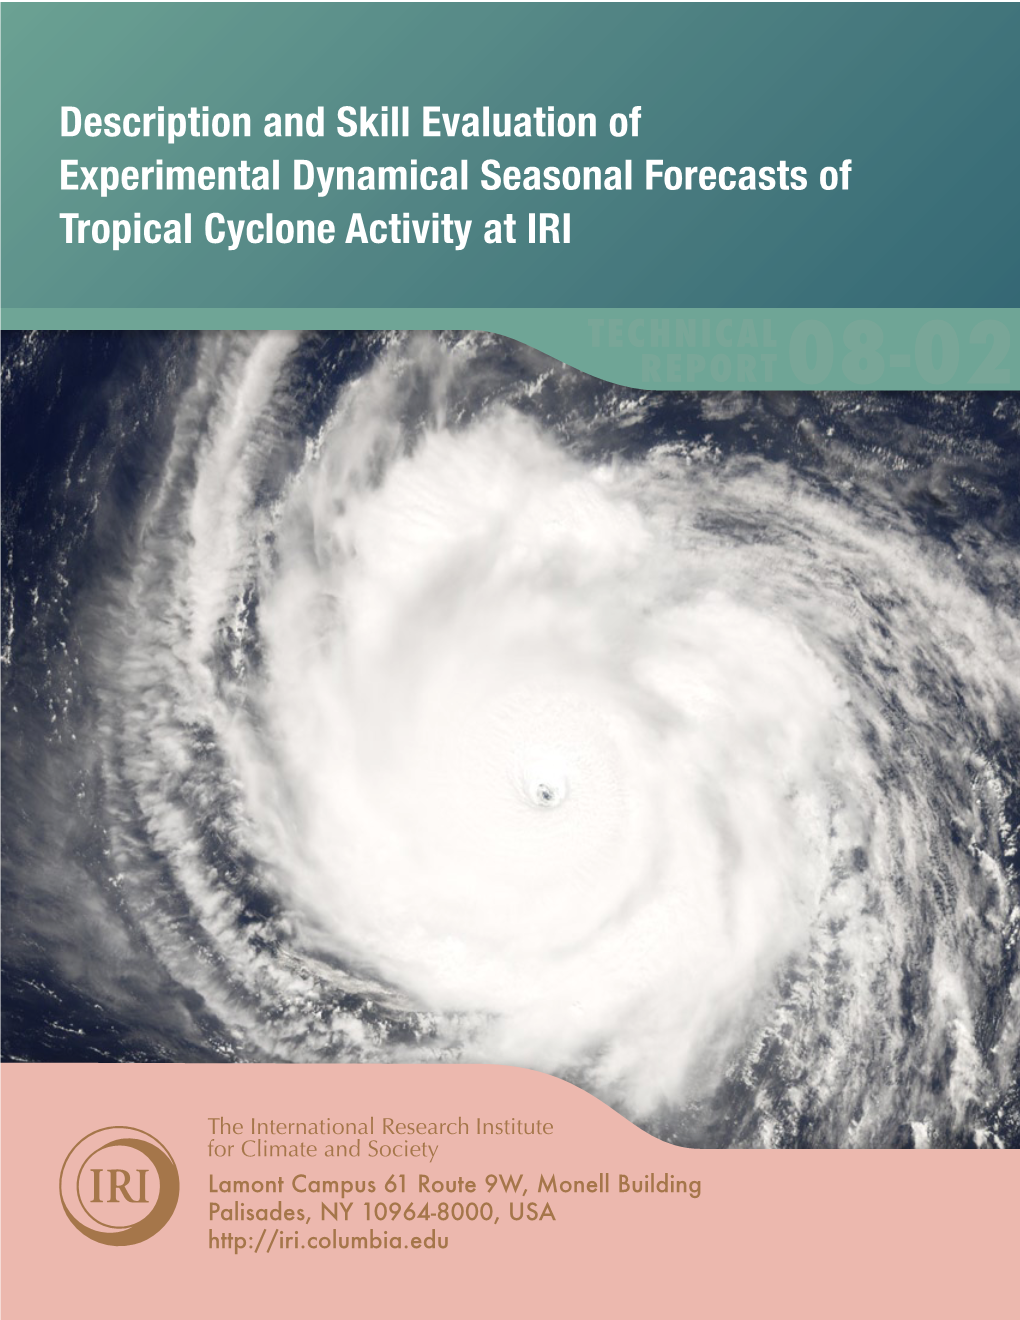 Description and Skill Evaluation of Experimental Dynamical Seasonal Forecasts of Tropical Cyclone Activity at IRI